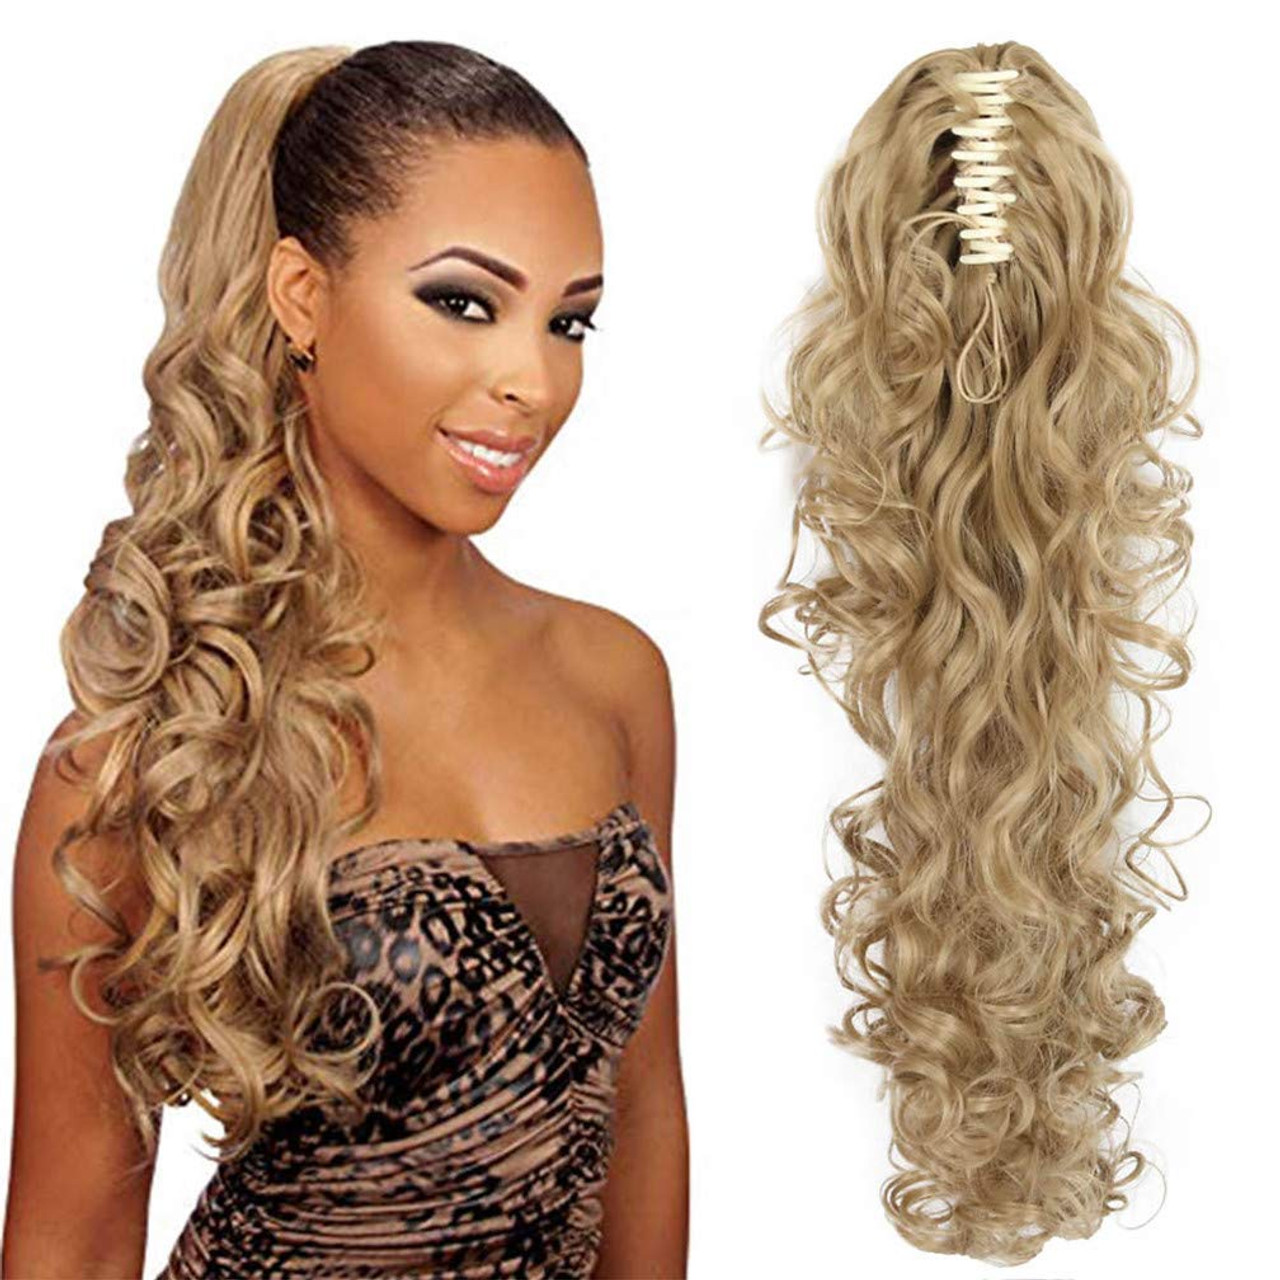 Real Hair, clip extensions, hair pieces